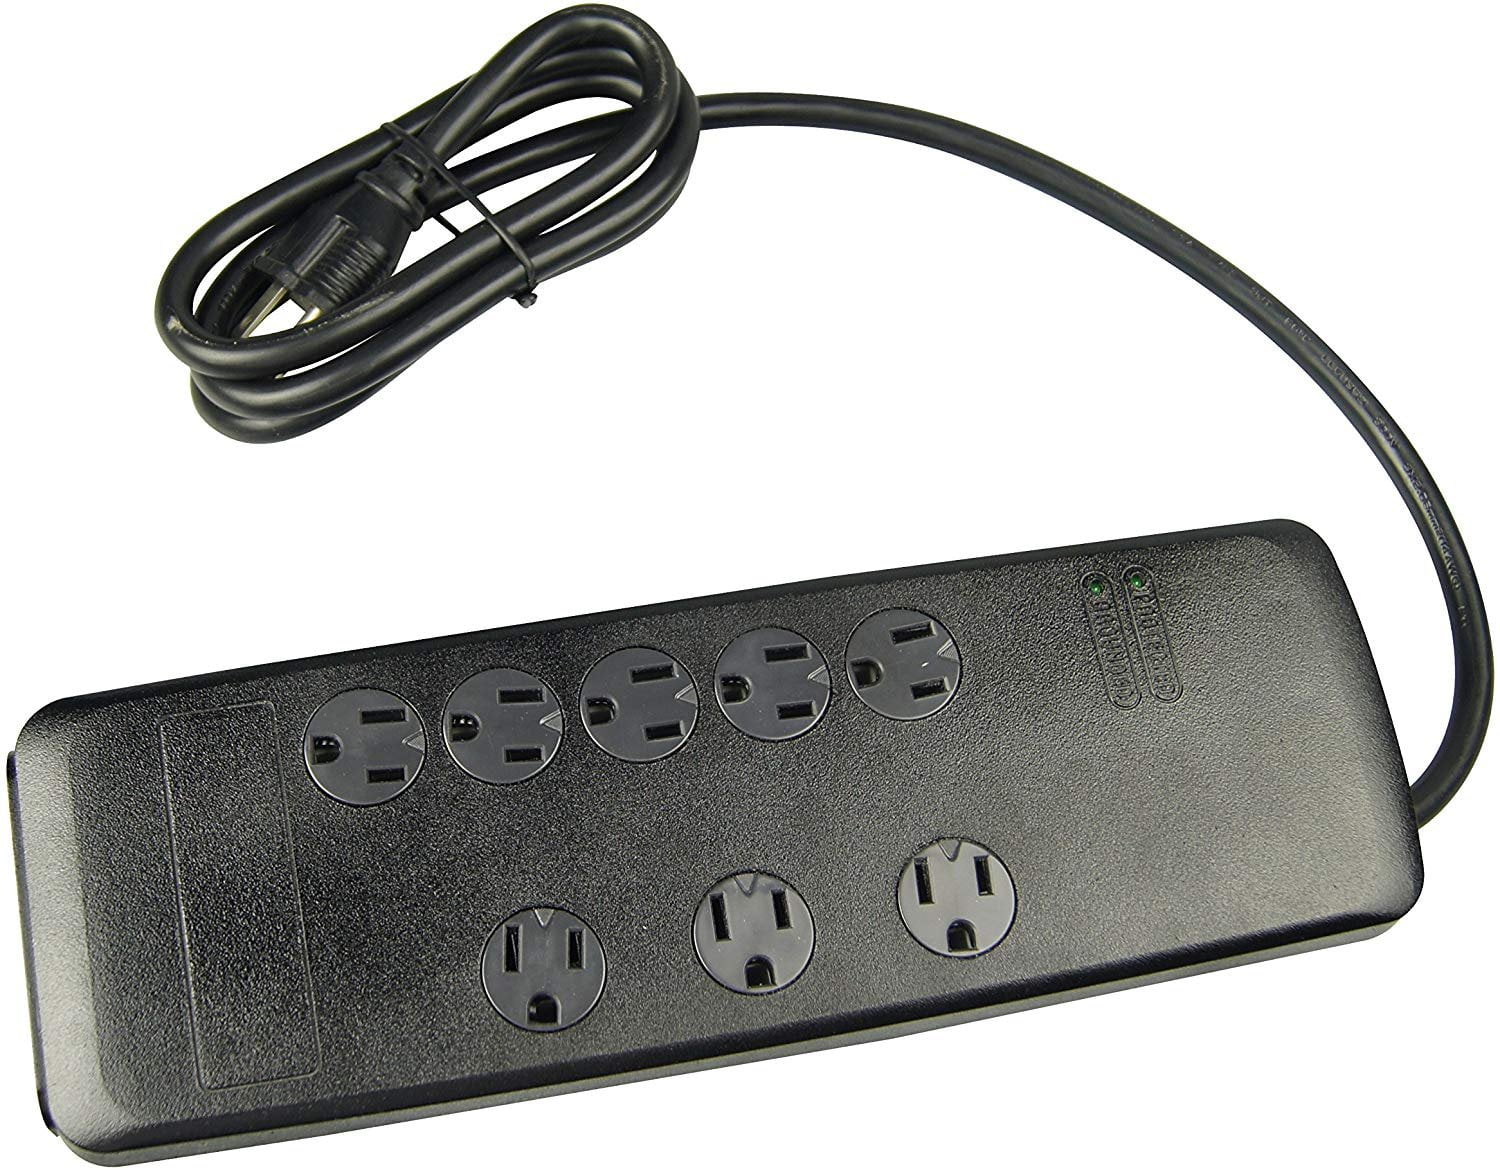 Woods 41076 Surge Protector with 6 Power 1440J of Protection White 6 Outlets 